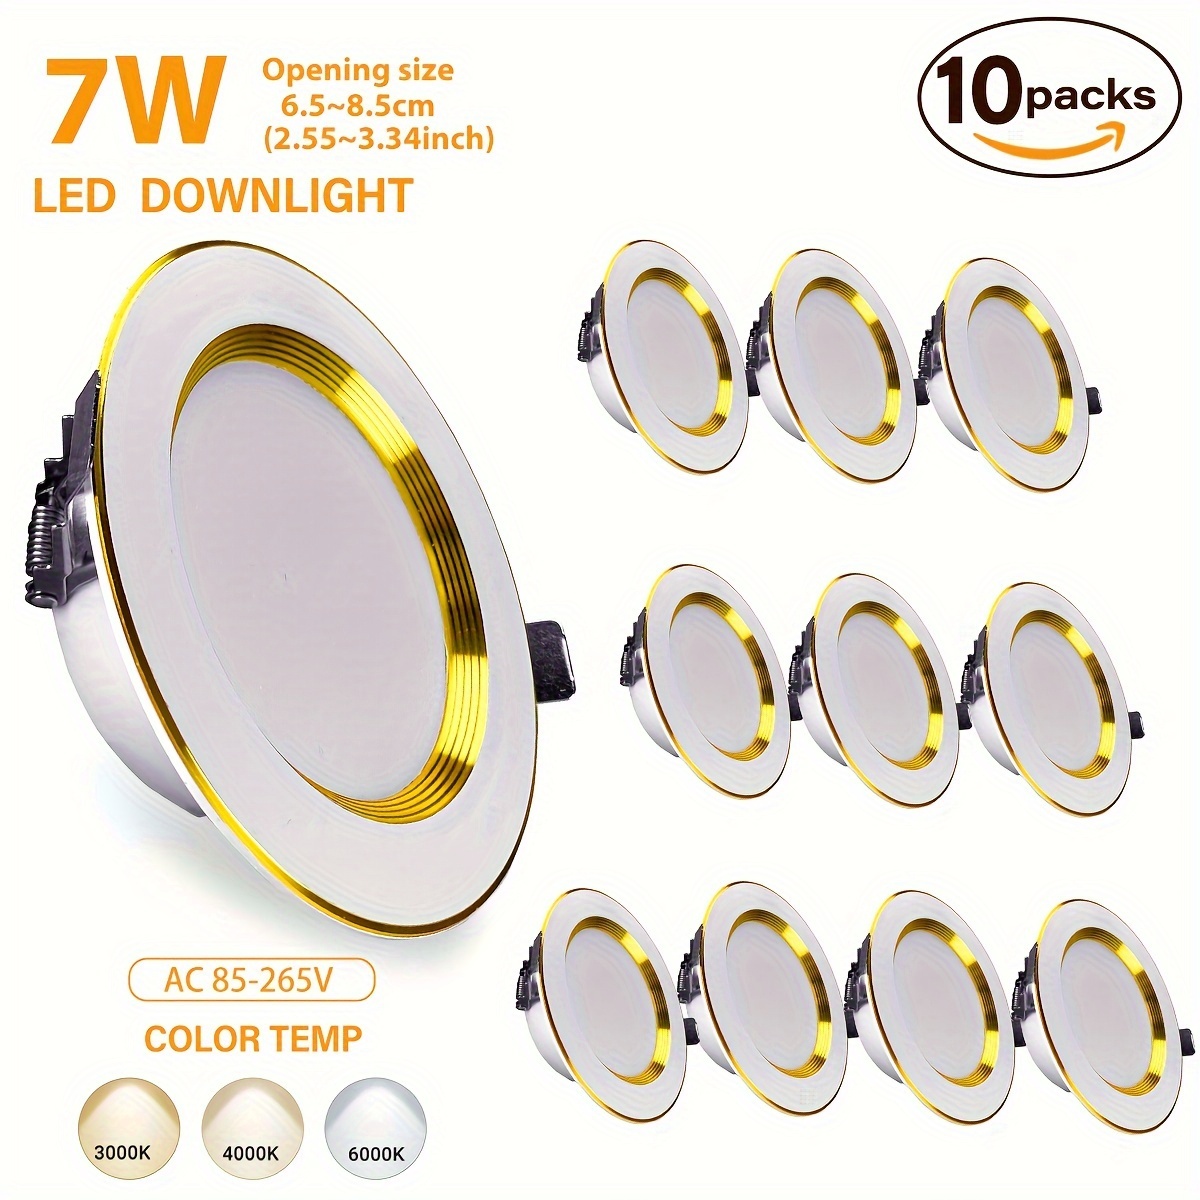 

10 Pack Recessed Lighting 4 Inch, Ultra-thin Led Recessed Lighting 7w 700lm Downlight Dimming Light3000k/4200k/6000k, Pot Indoor Exterior Soffit Lighting